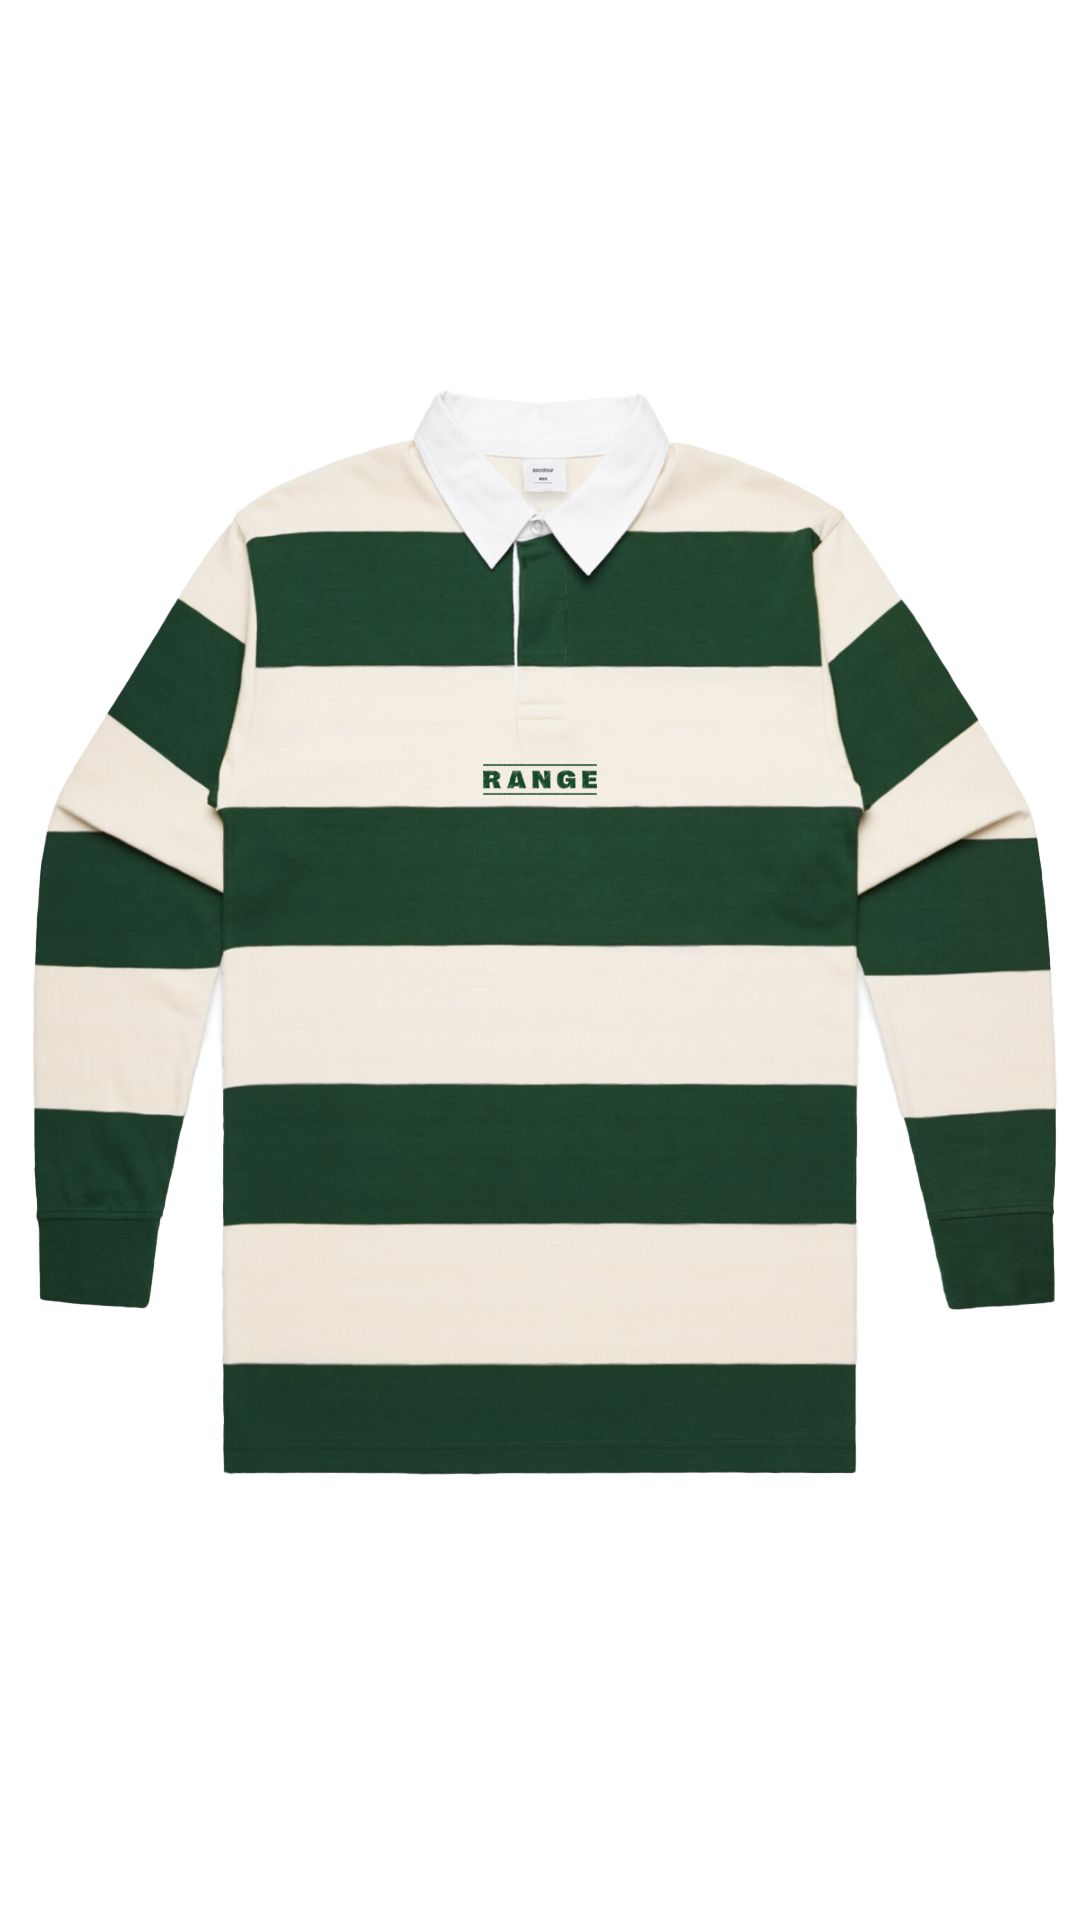 Range Rugby Jersey - White & Green